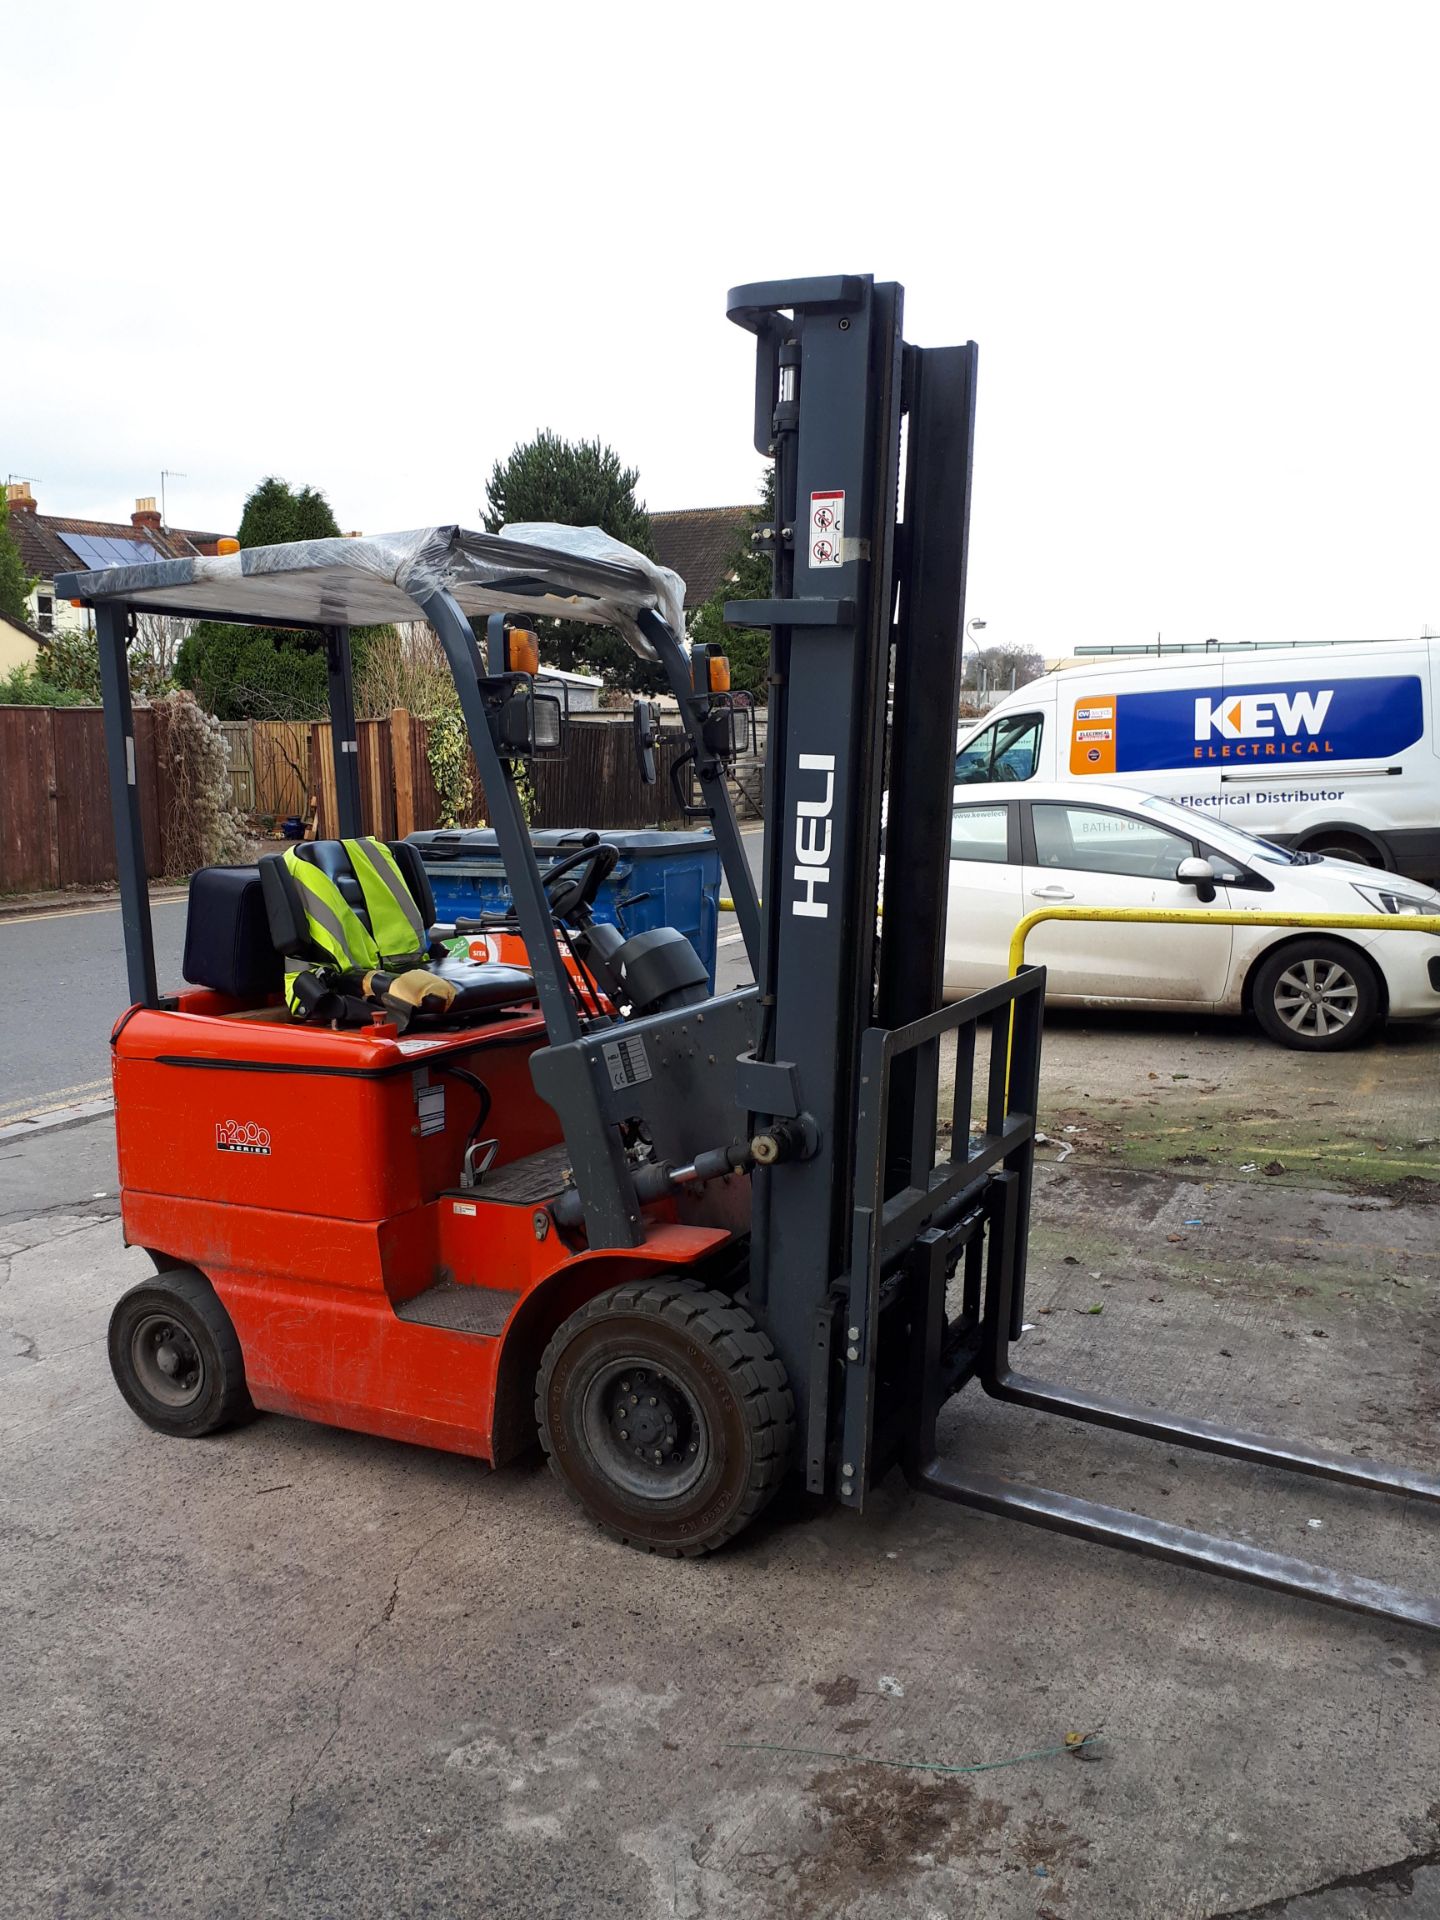 Heli HFP15 1.5Ton Electric Forklift Truck, Twin Stage Mast, Serial Number G3355 (2009) 1,566.0